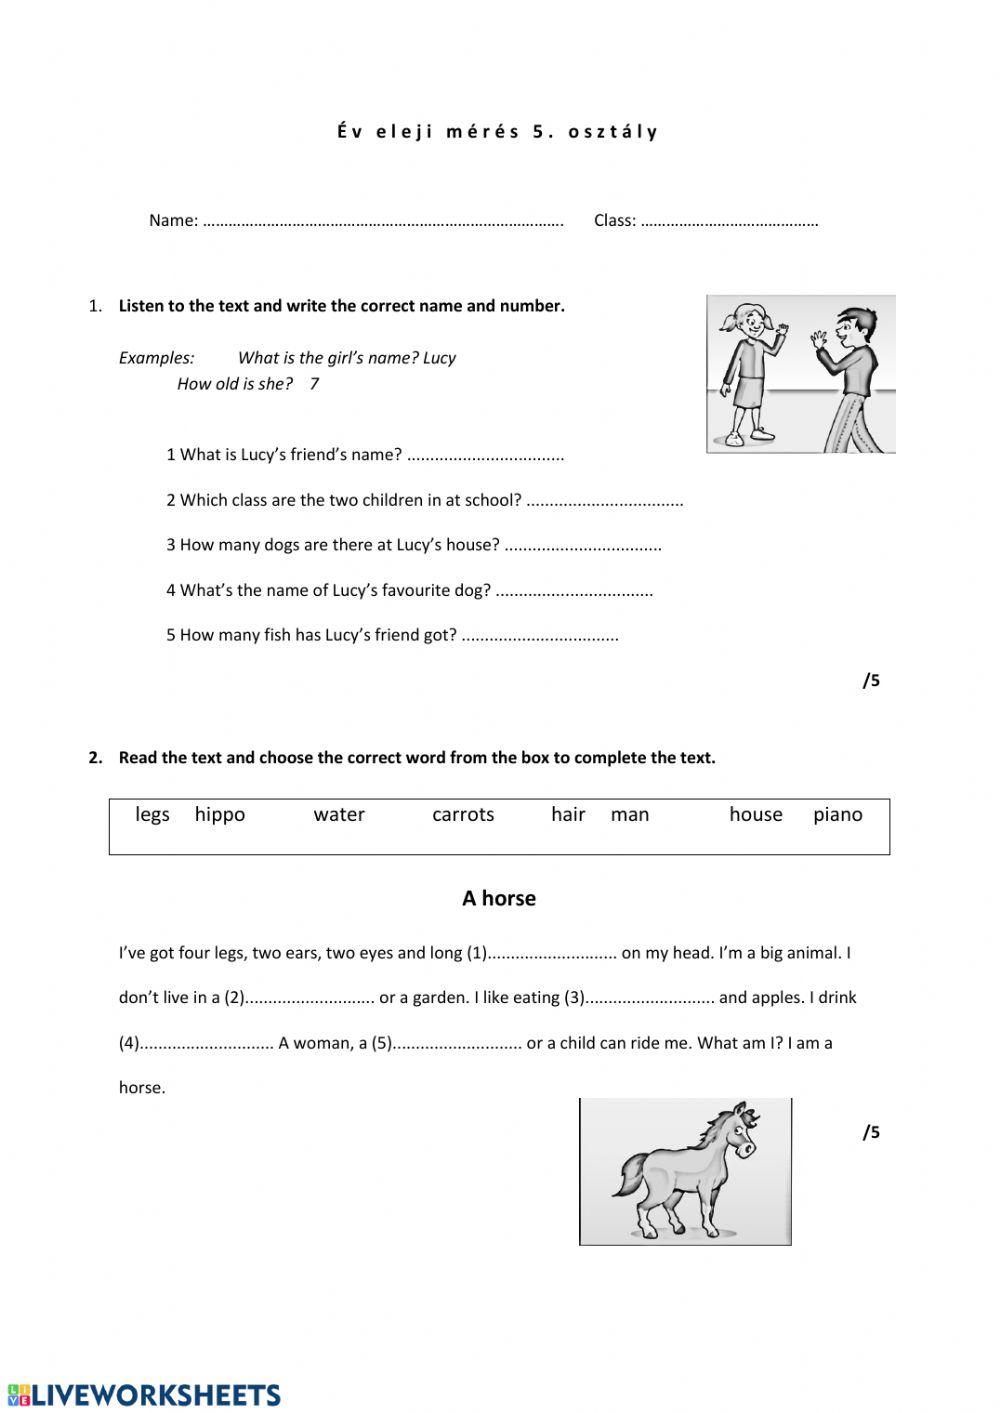 Class 4 end of year test